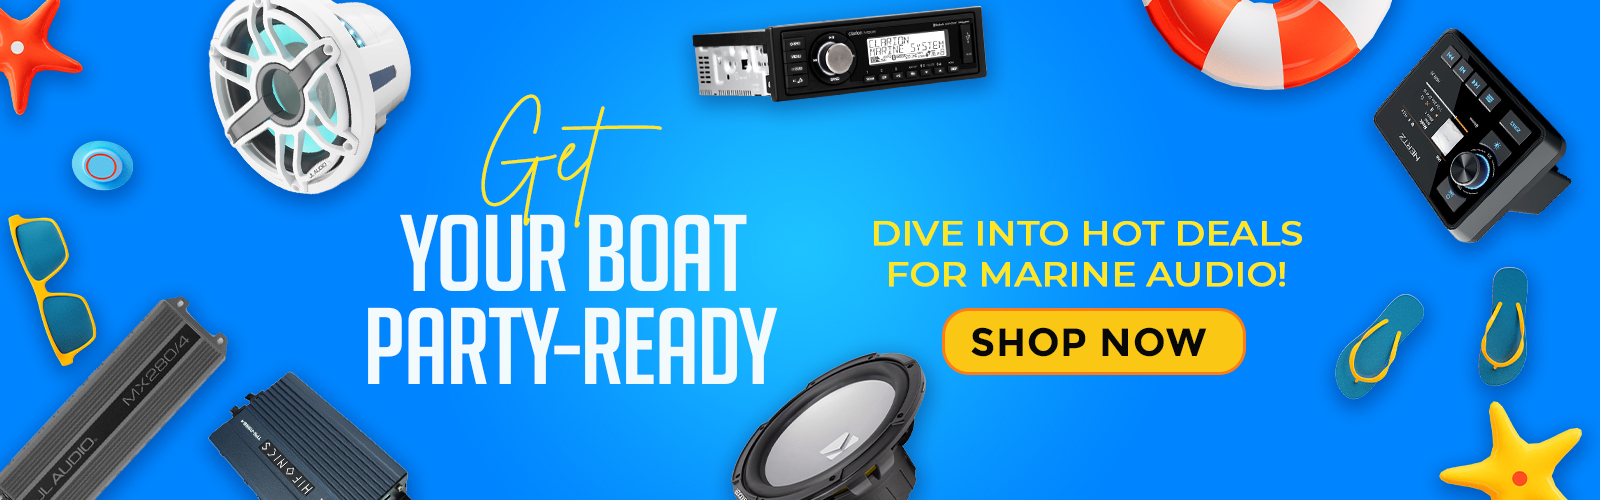 Get Your Boat Party-Ready: Dive into Hot Deals on Marine Audio!